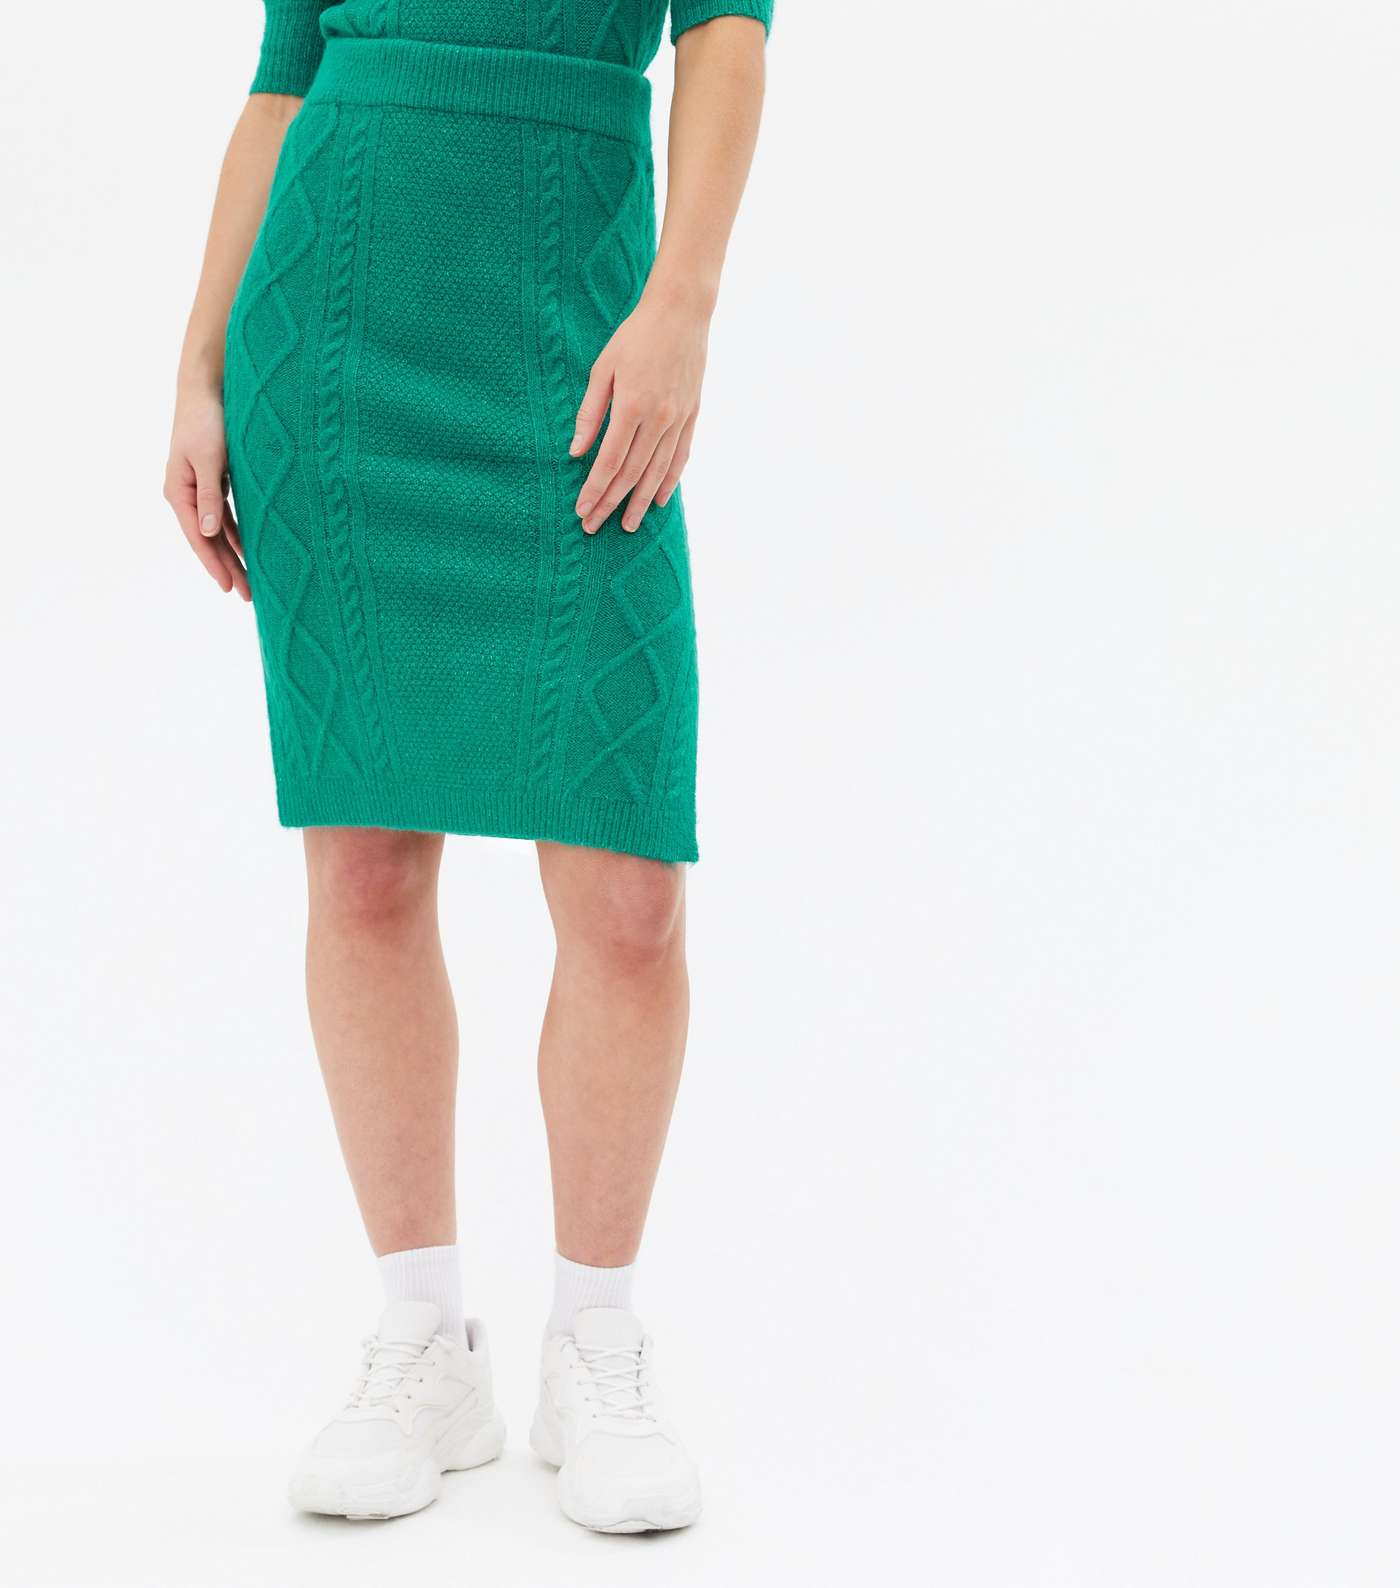 Sunshine Soul Green Cable Knit Bodycon Skirt Image 2